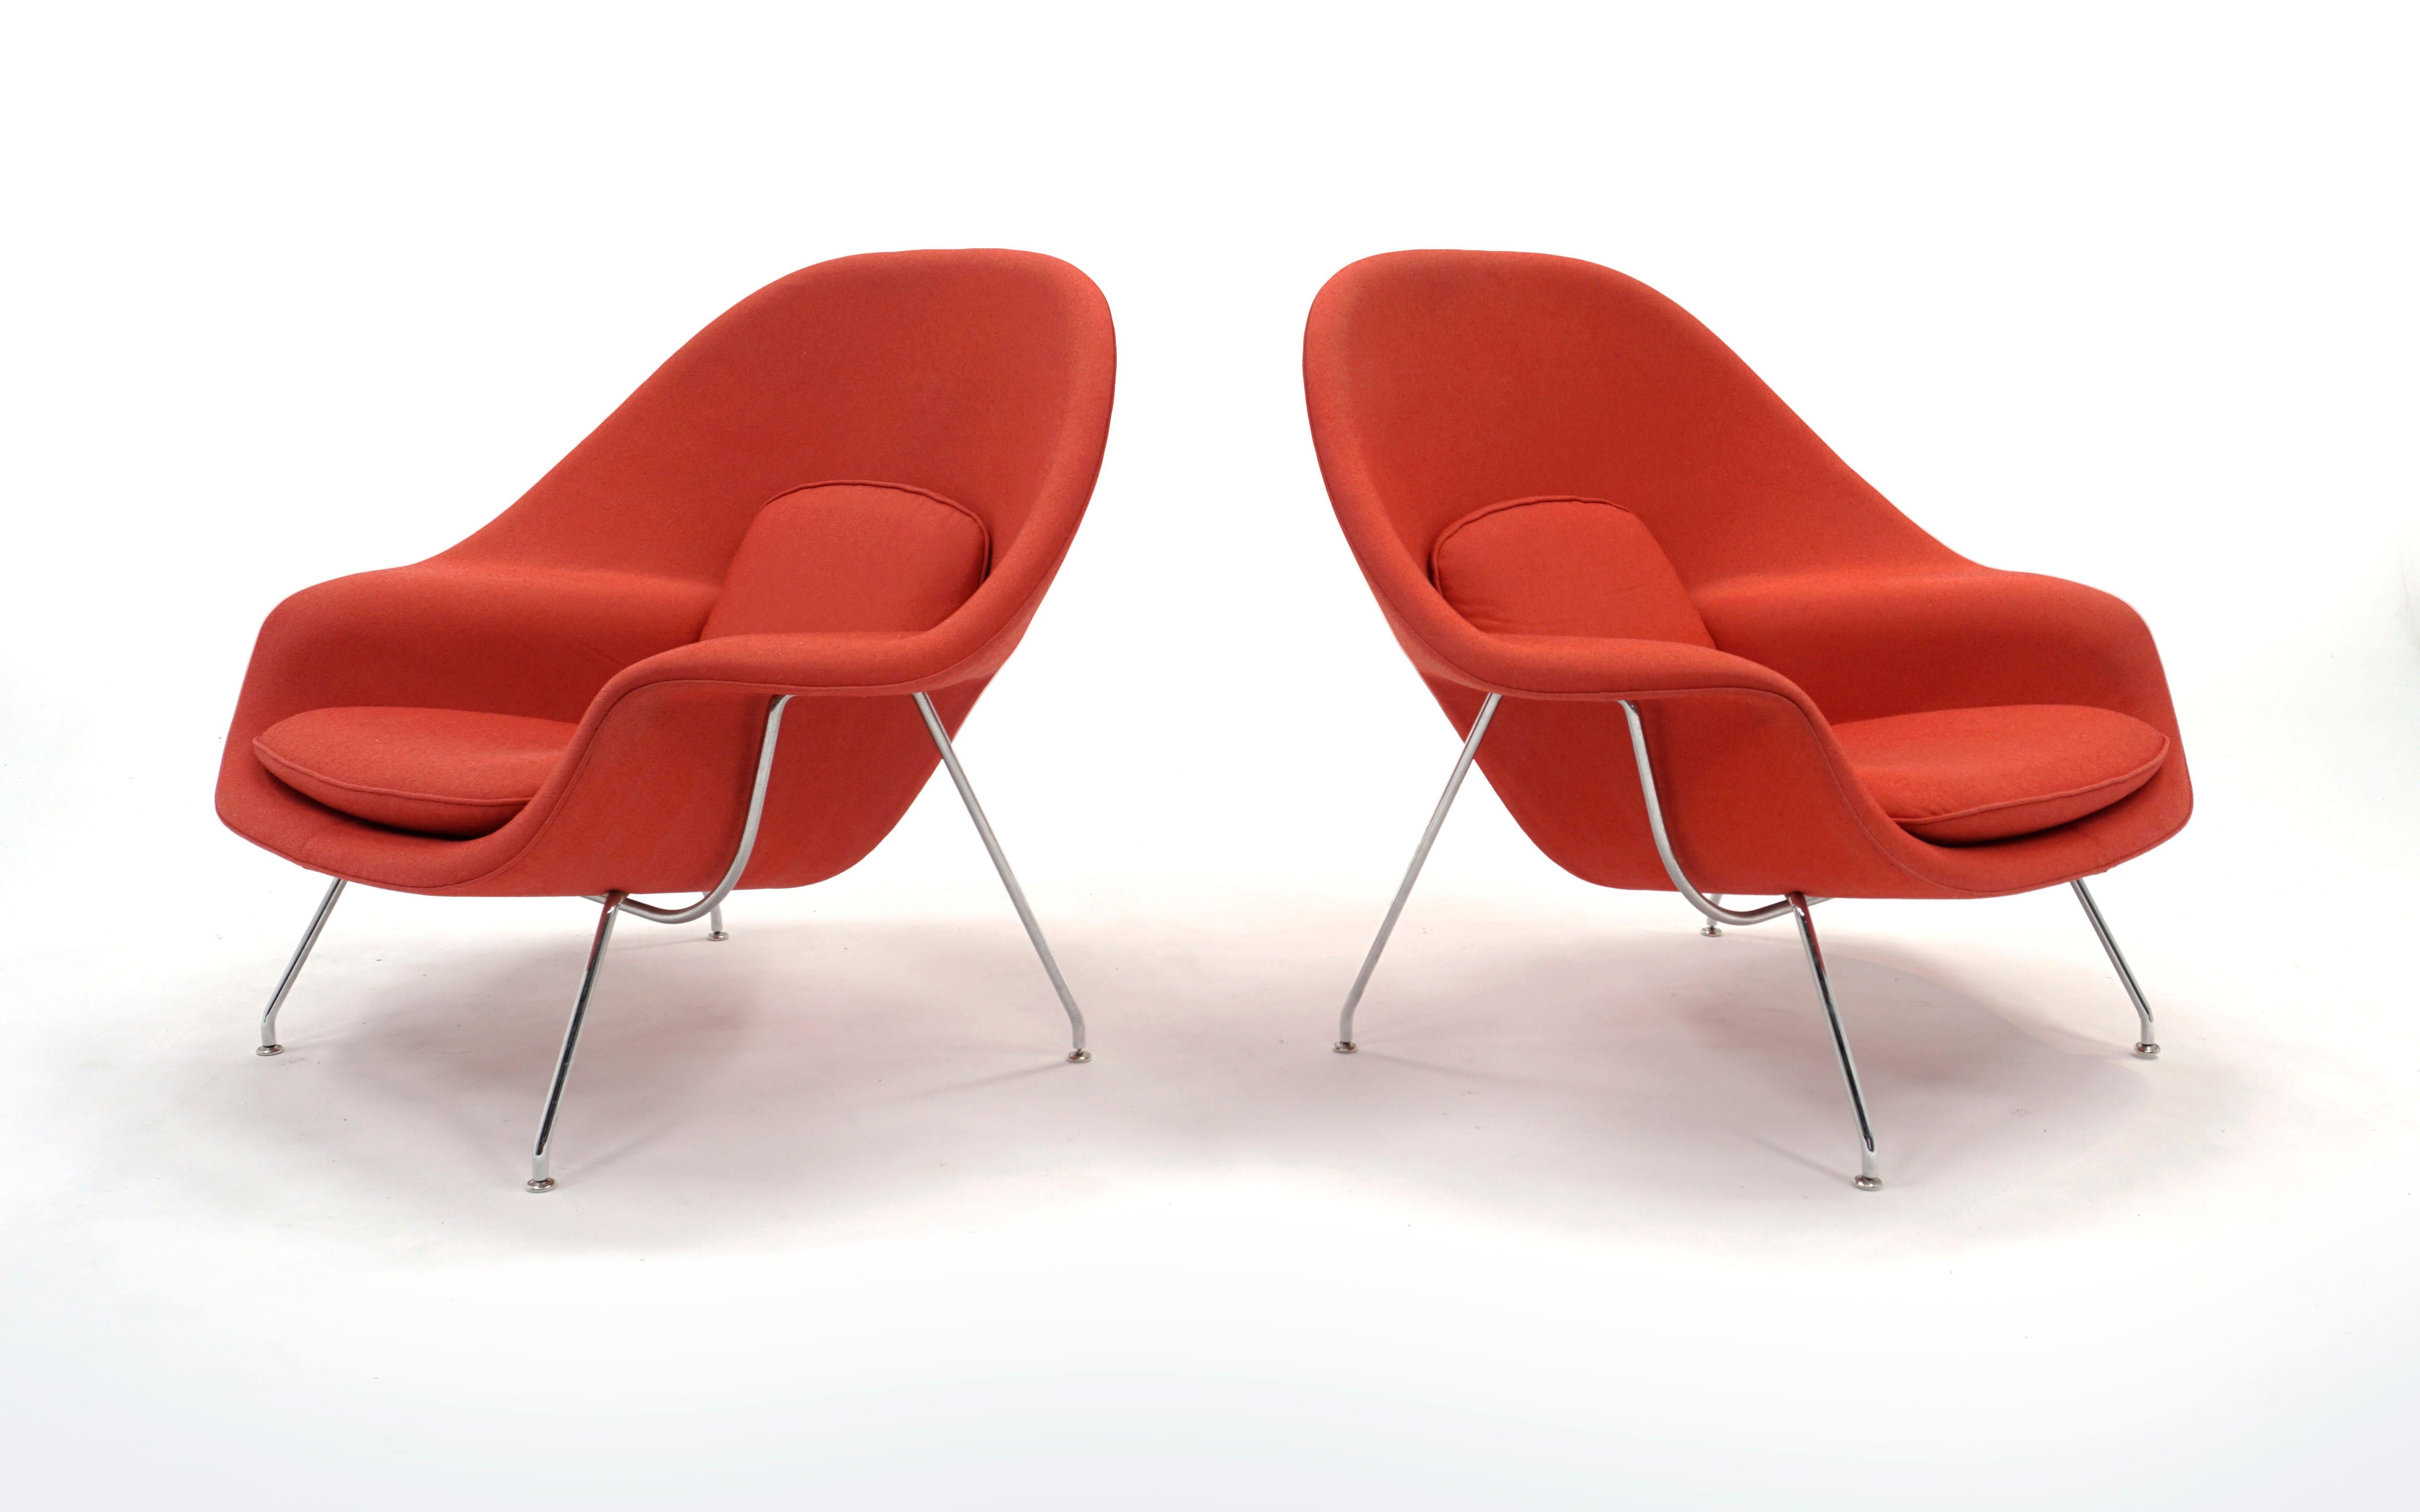 Two matching Womb chairs designed by Eero Saarinen, manufactured by Knoll. Price is for each. Completely original, only five years old. The chrome looks like new and the fabric has no tears or wear. There are a few tiny black spots (likely ink) that